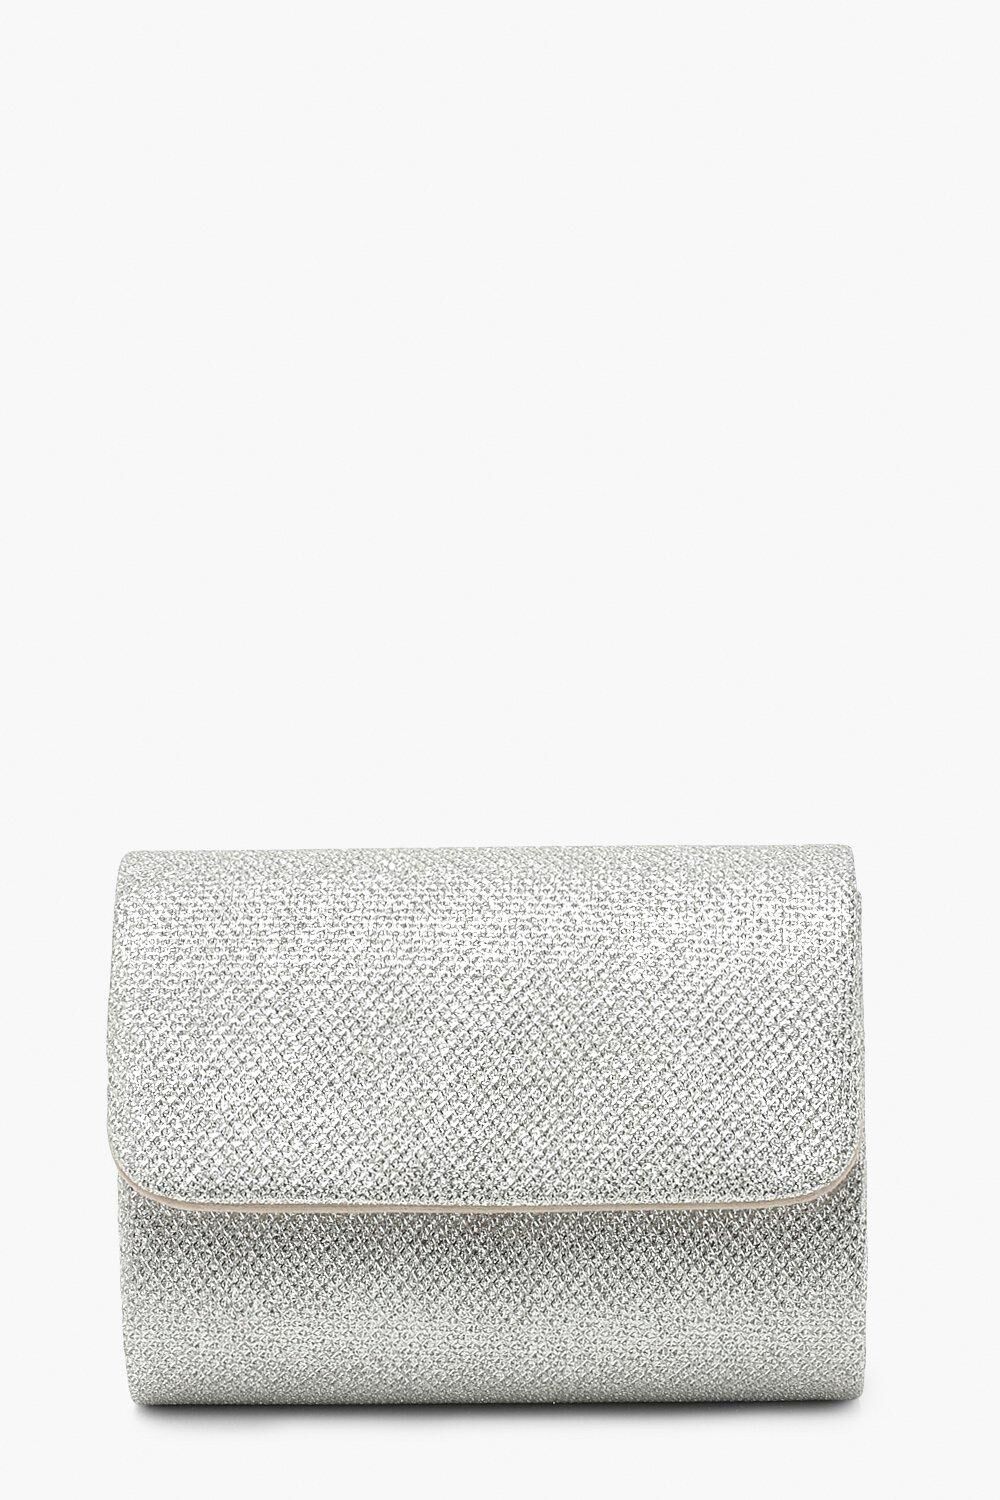 Boohoo Structured Metallic Clutch Bag & Chain- Grey  - Size: ONE SIZE